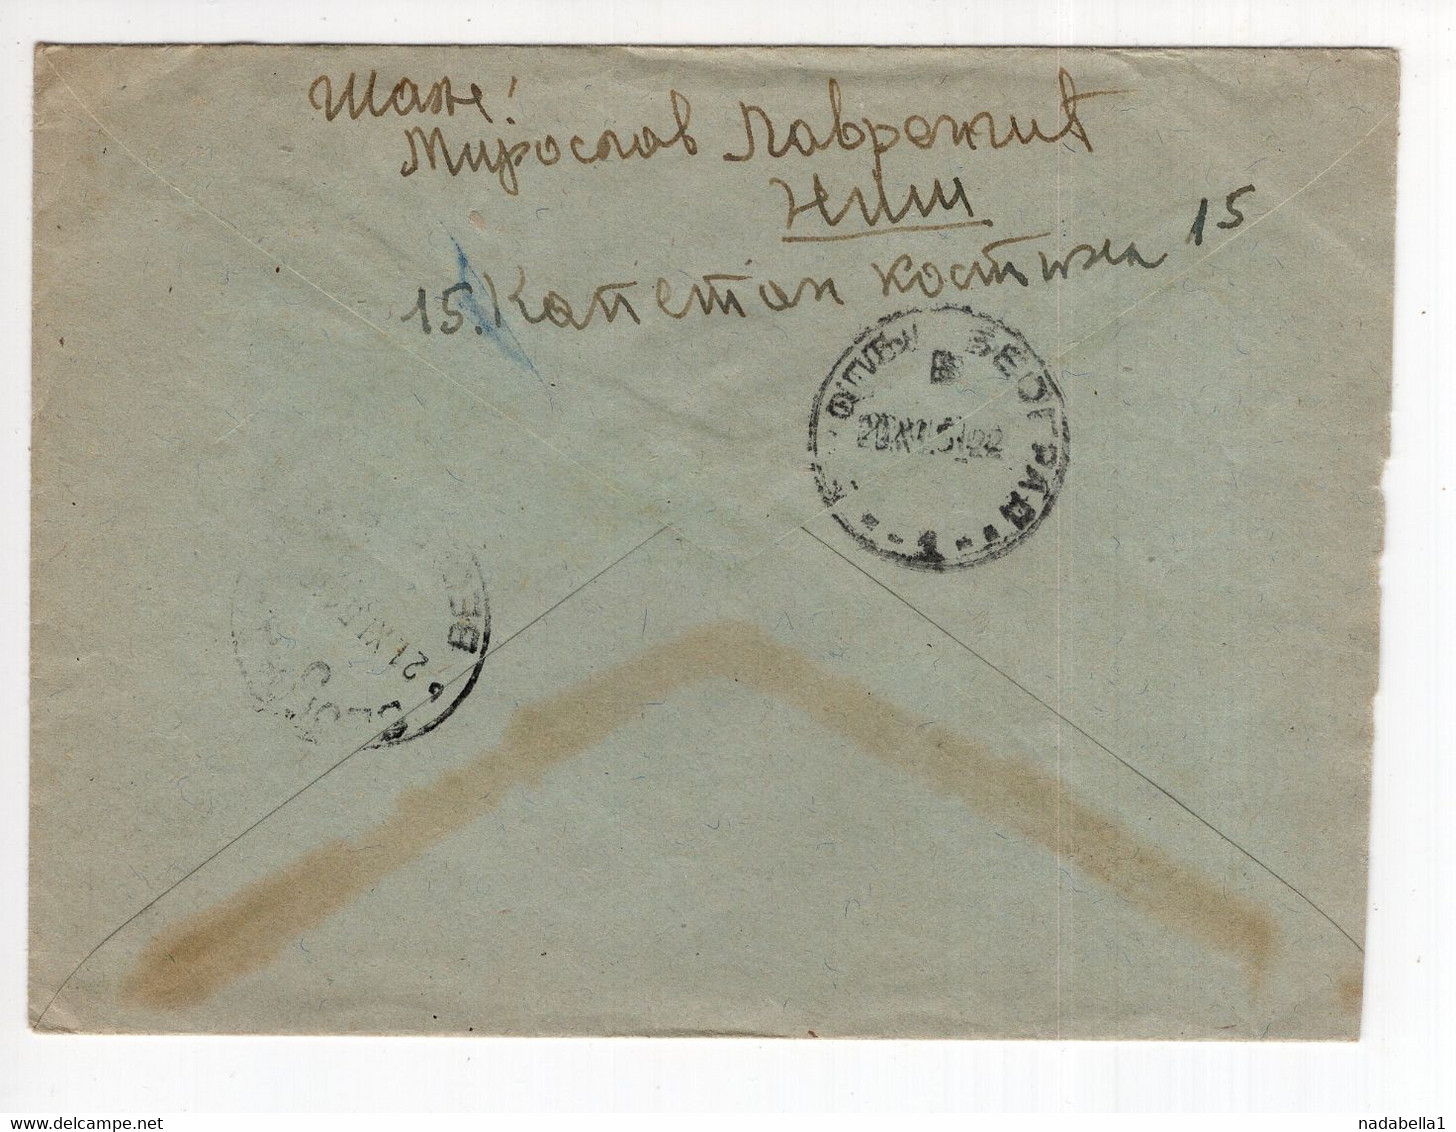 1951. YUGOSLAVIA,SERBIA,NIS,50 DIN BLED STAMP,POSTAGE DUE 2 DIN. APPLIED IN BELGRADE,EXPRESS COVER, - Timbres-taxe